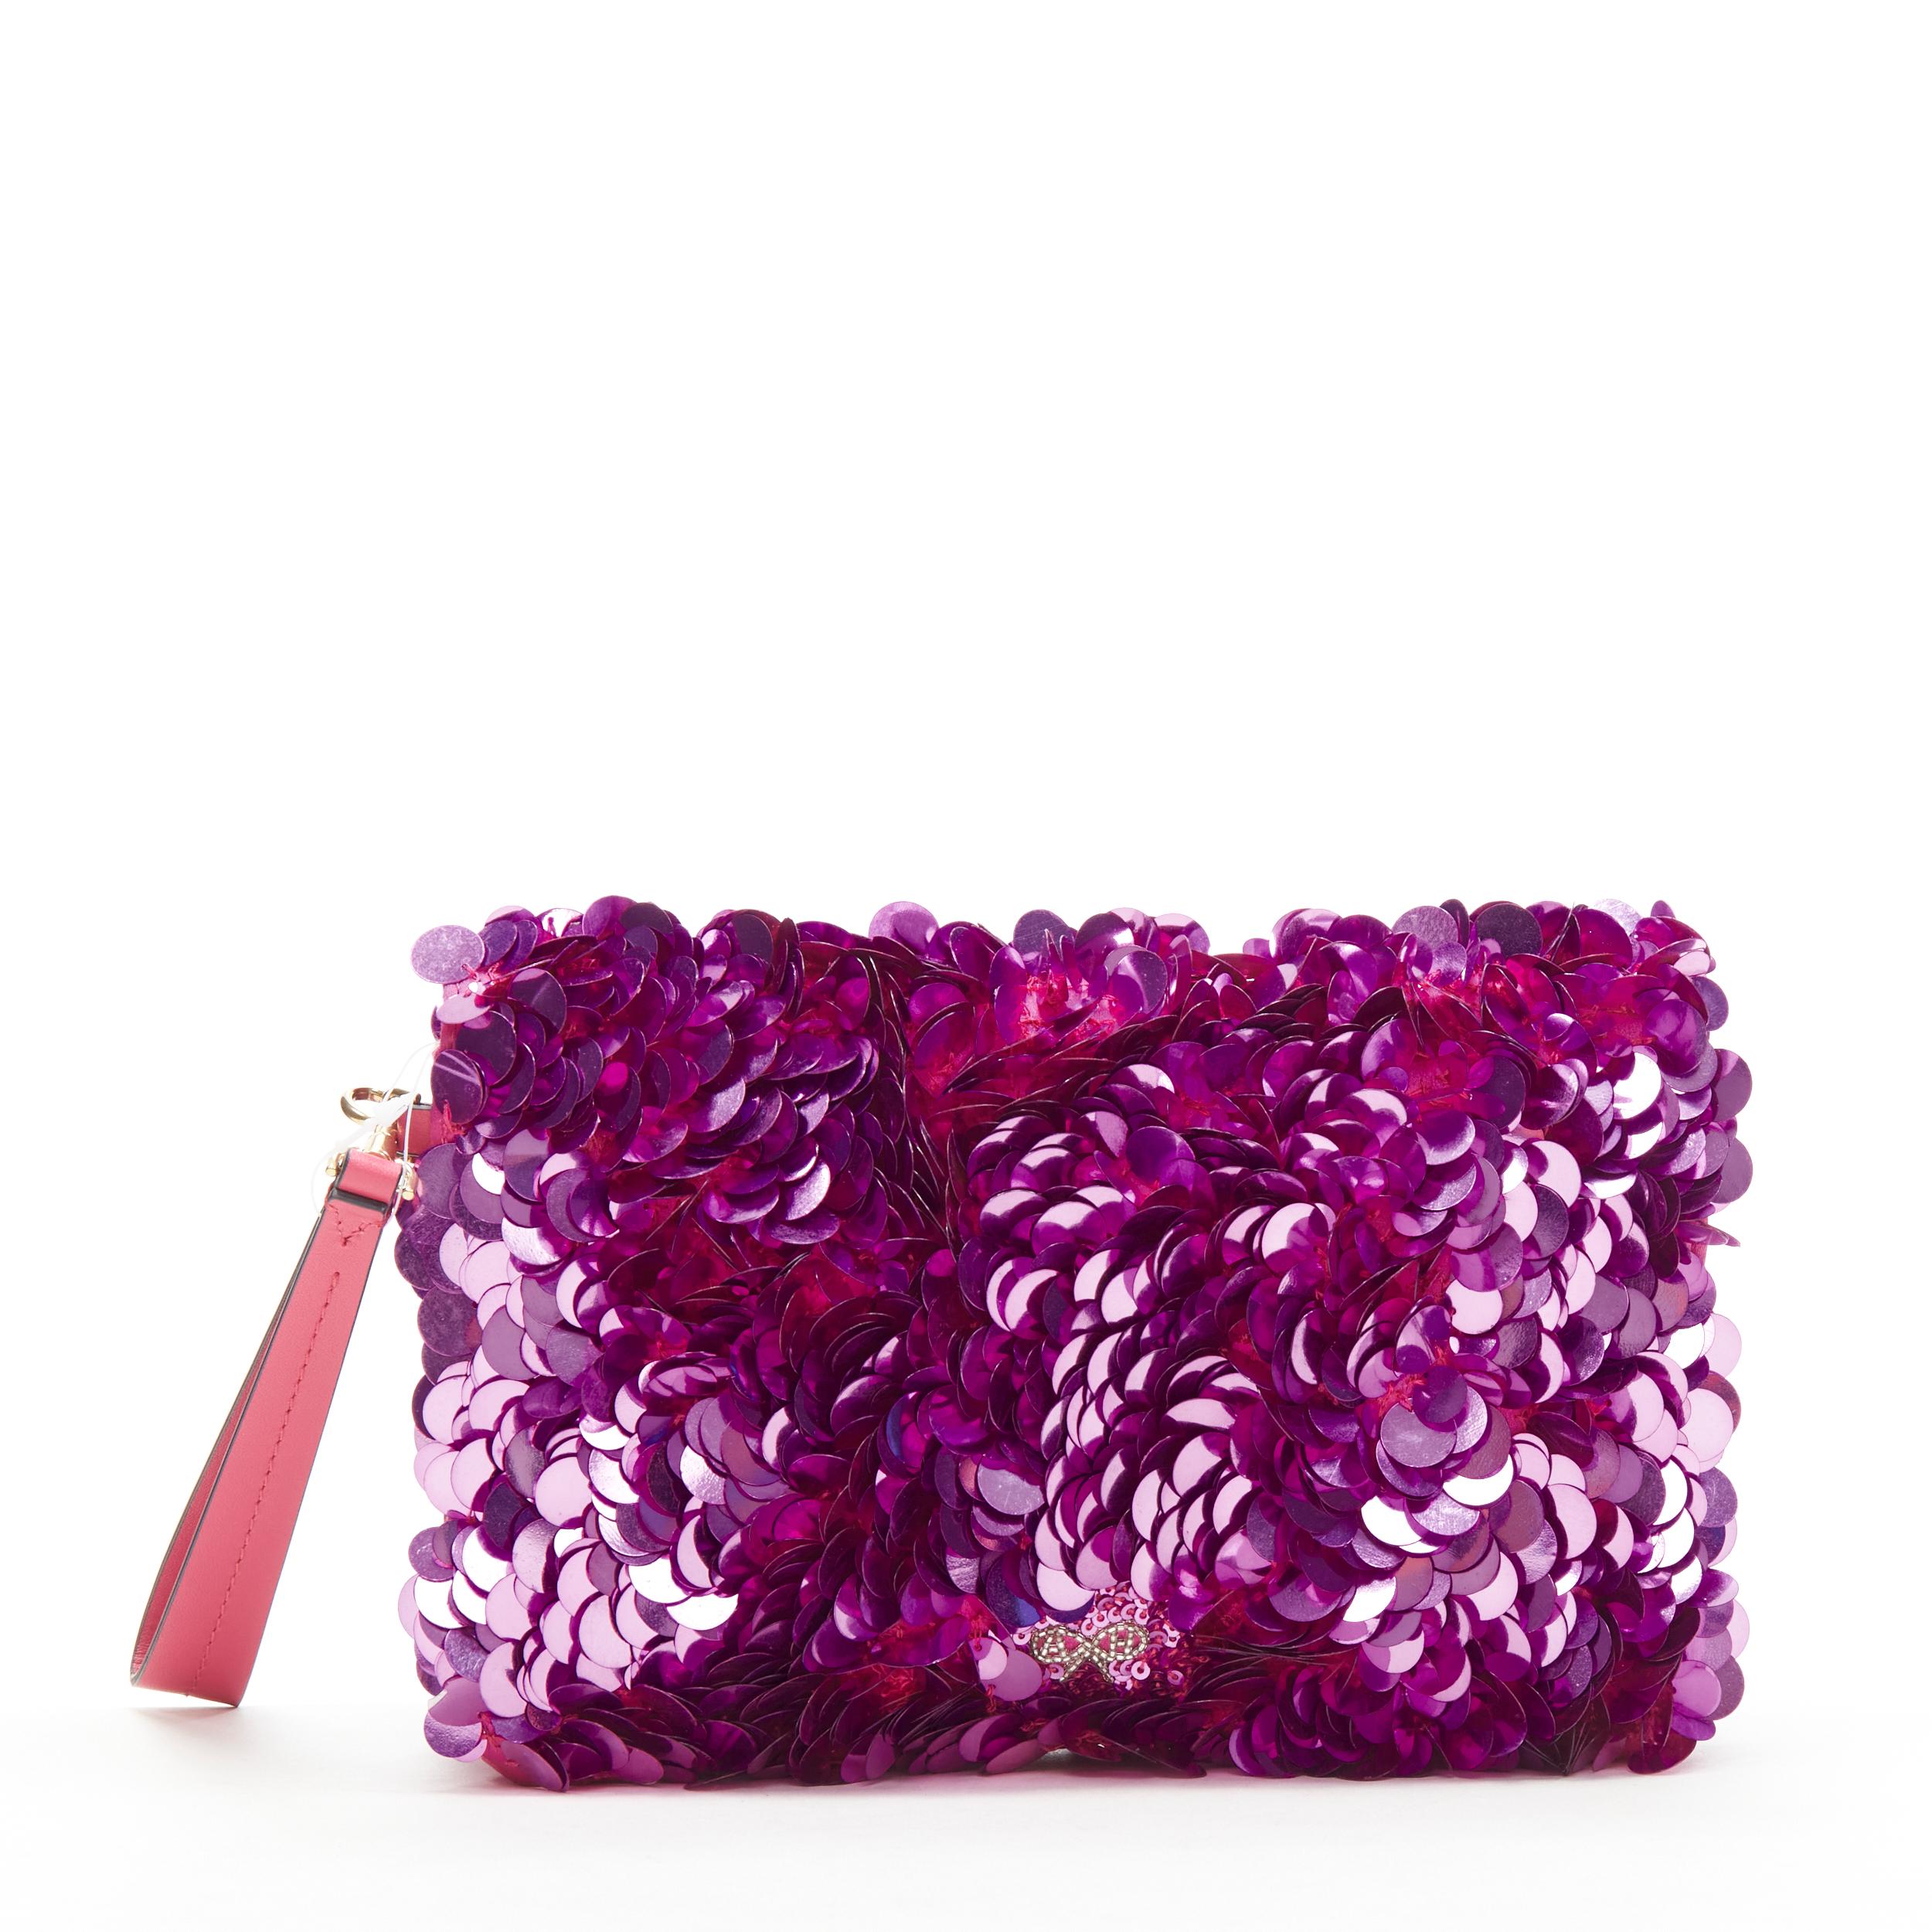 ANYA HINDMARCH Walkers Prawn Cocktail Chips pink sequins crystal clutch bag 1